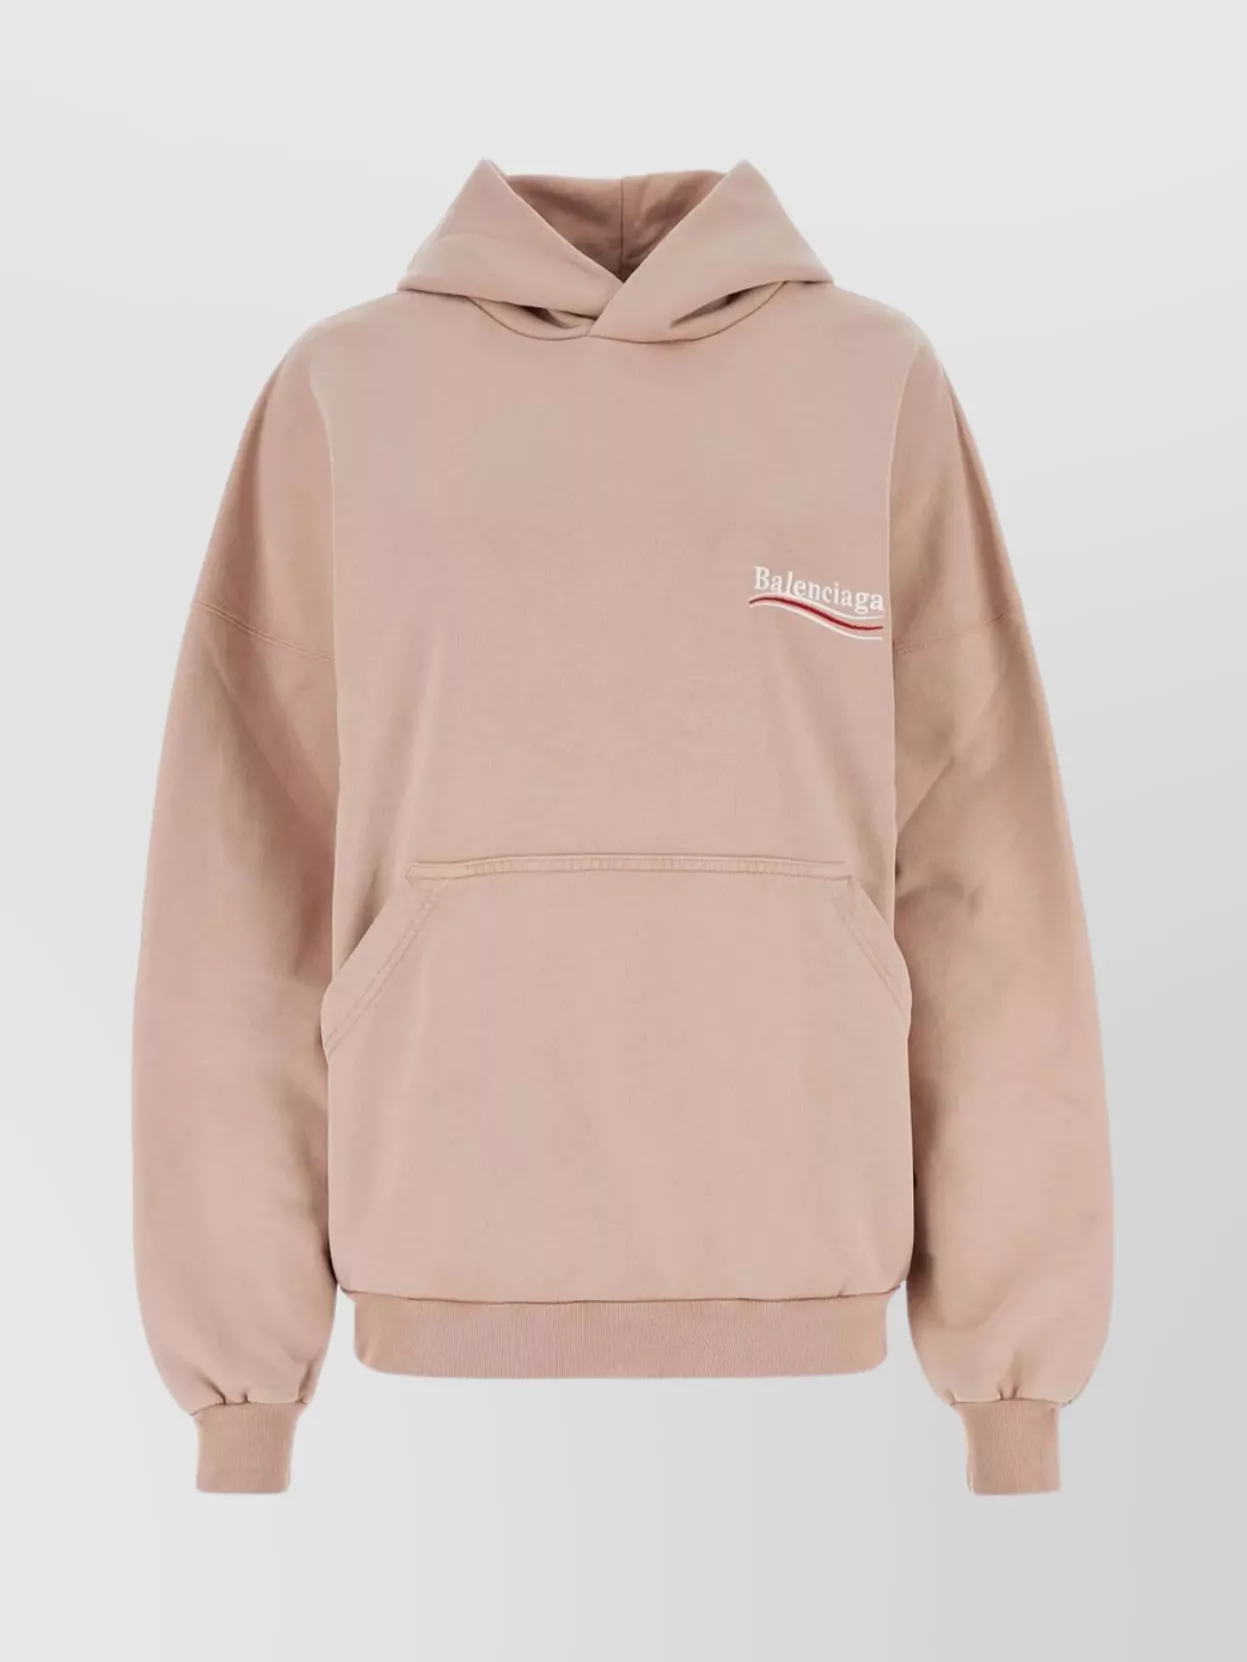 Balenciaga Cotton Hooded Sweatshirt With Pouch Pocket In Pink